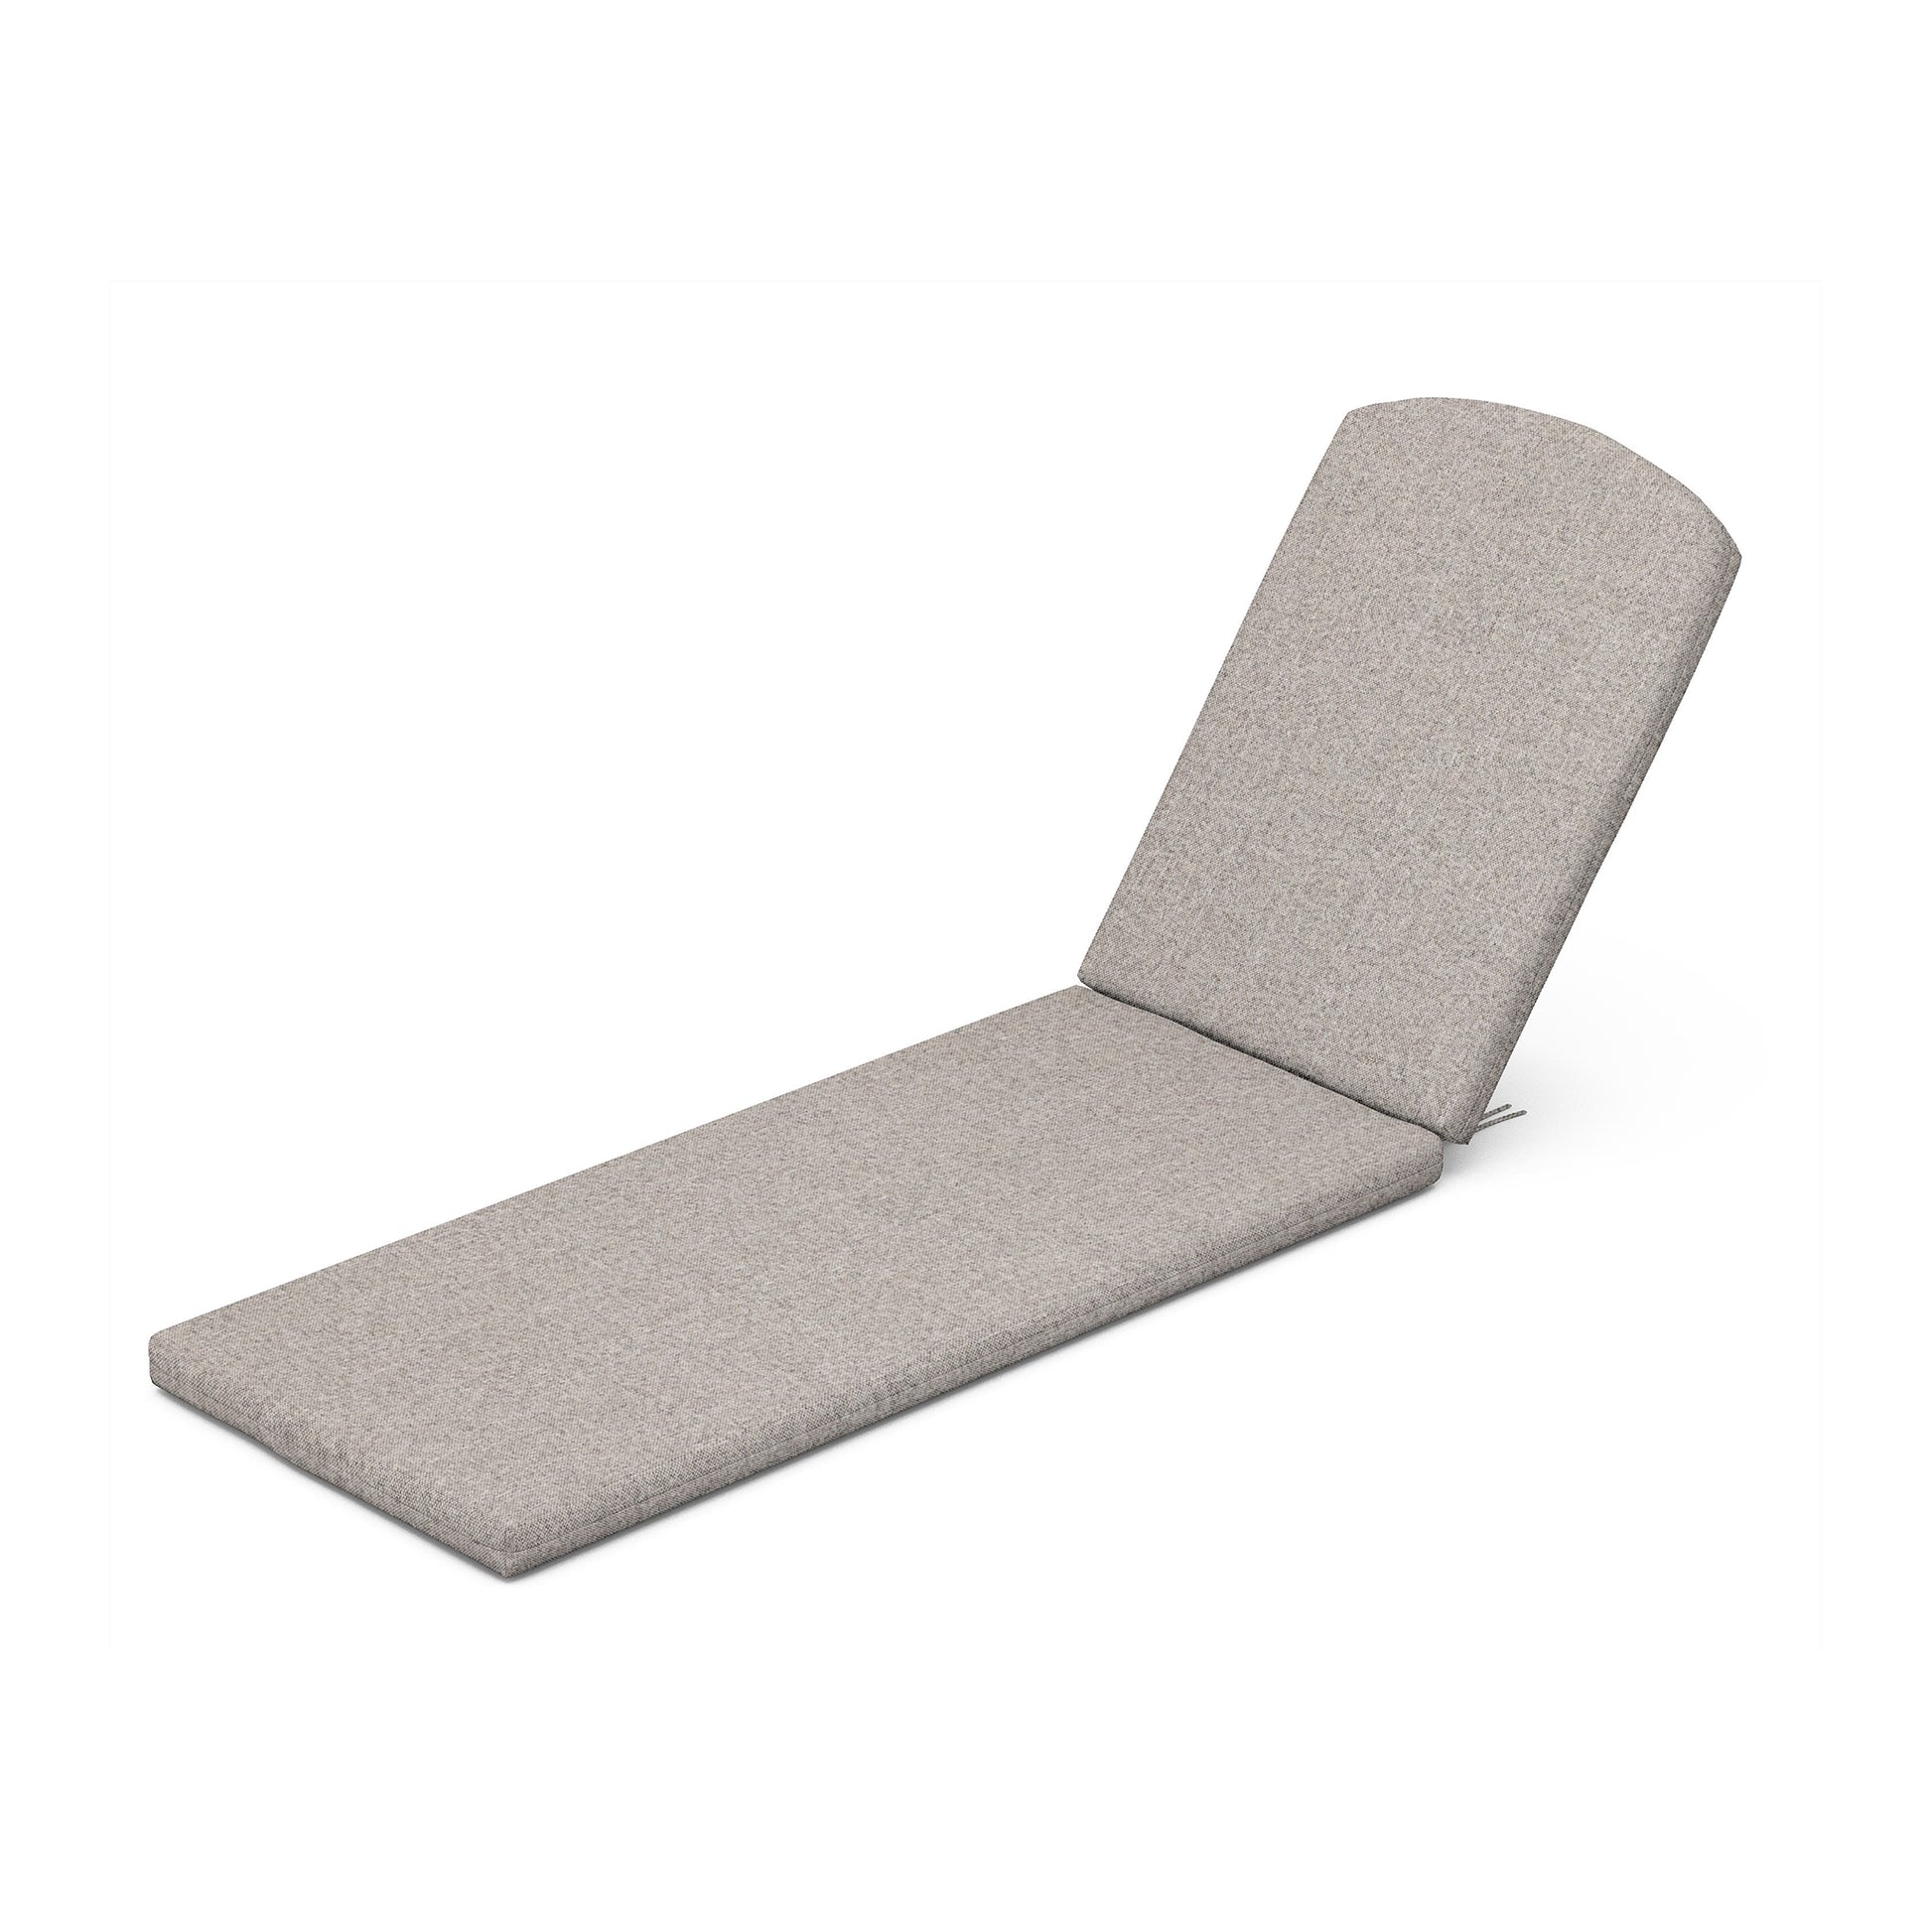 A POLYWOOD XPWF0004 - Full Seat Cushion Nautical Chaise Lounge with weather-resistant upholstery fabric on a white background.